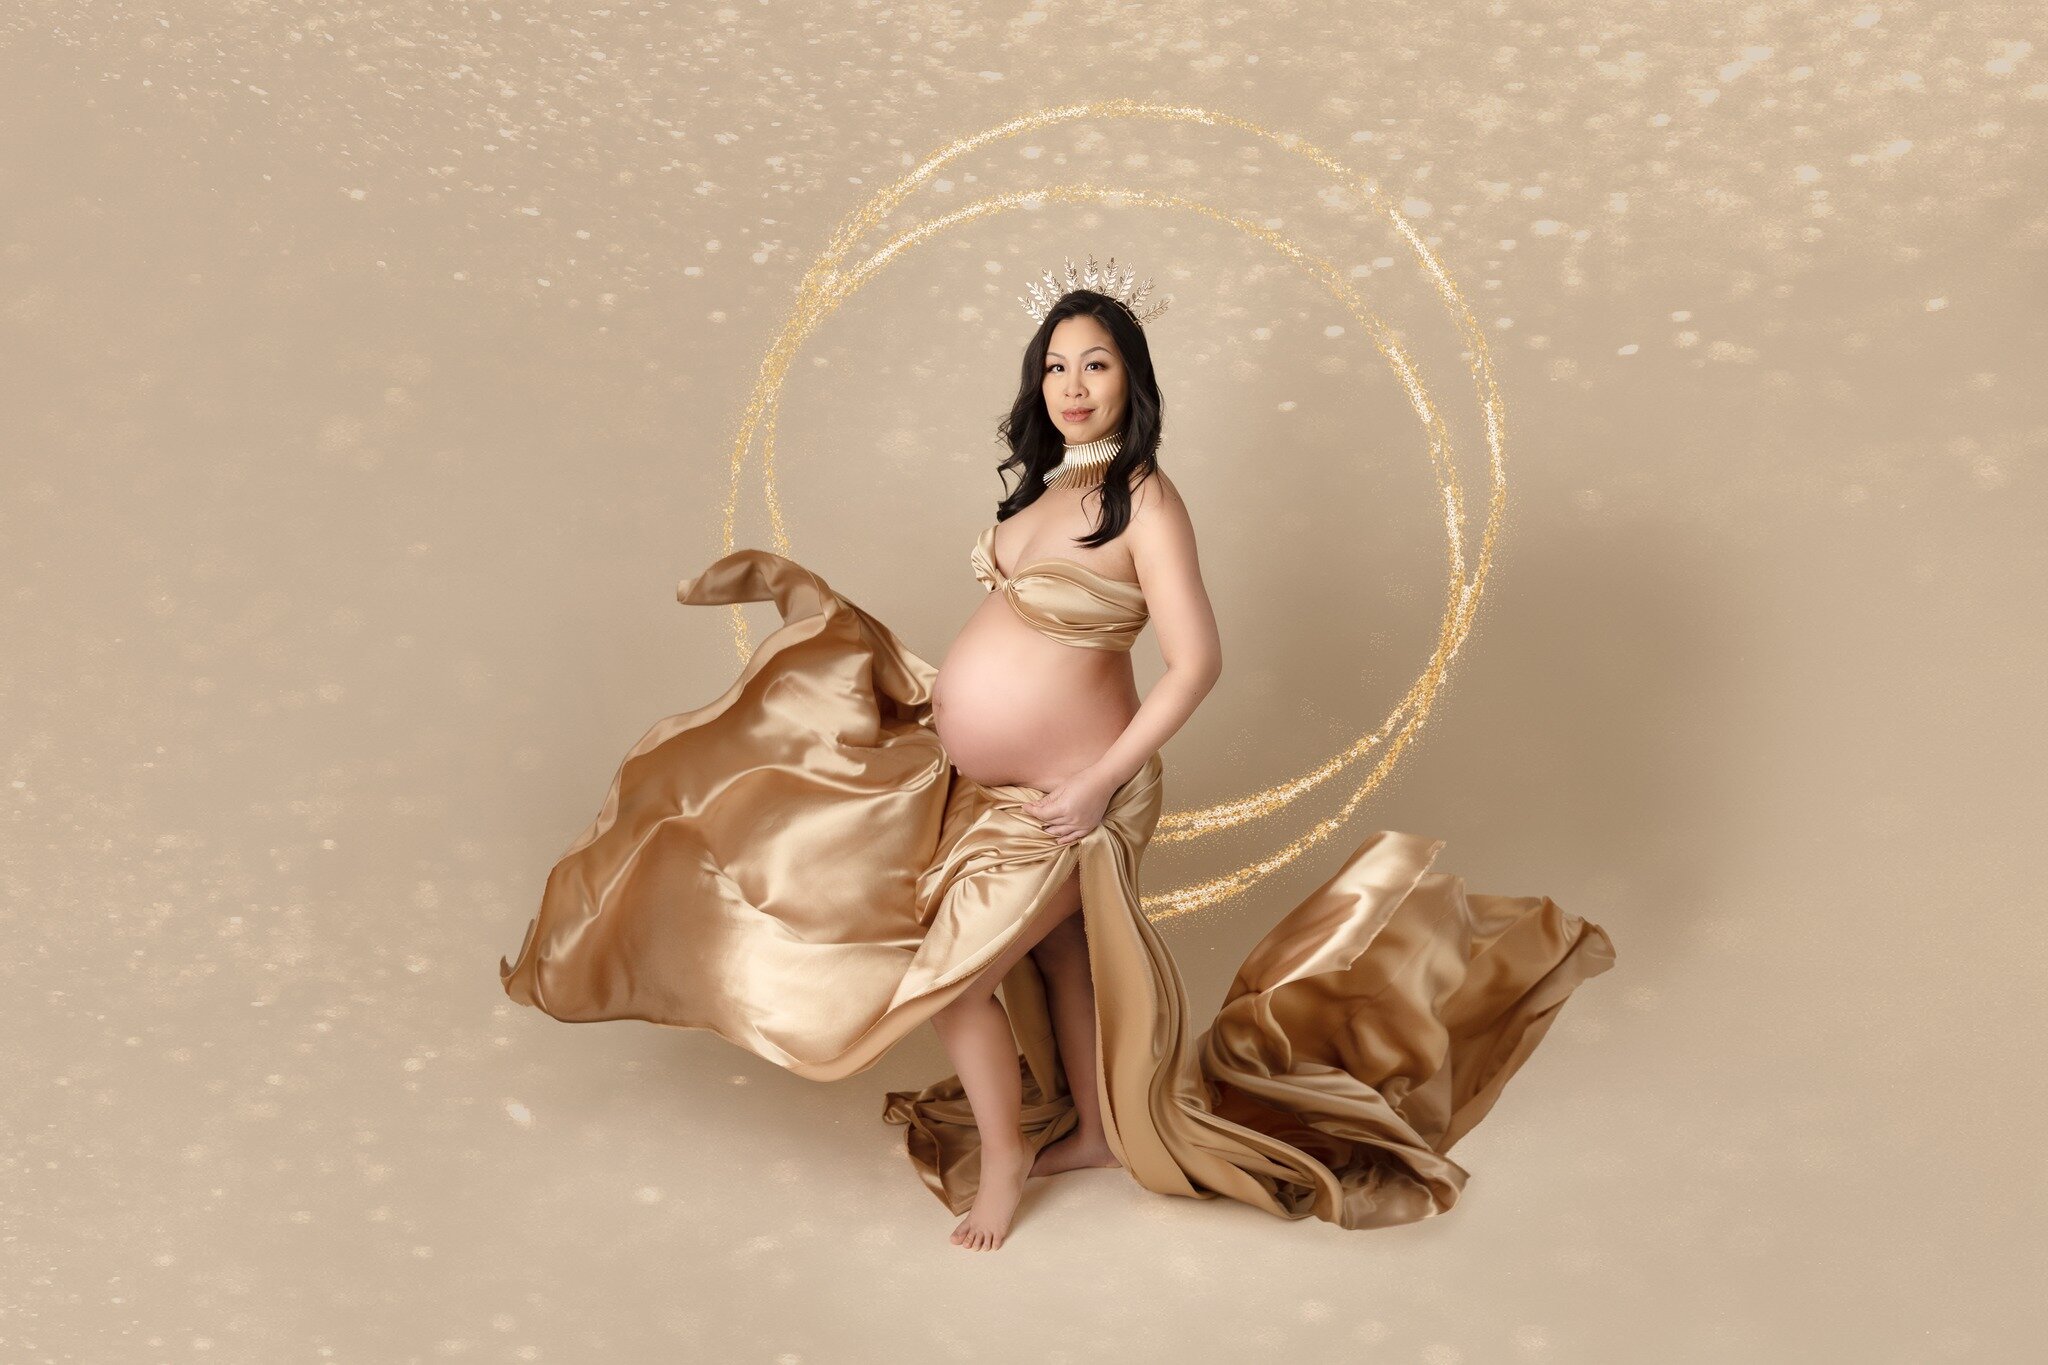 I am so excited to share this stunning maternity photo of the beautiful mom-to-be who radiates nothing but goddess vibes!

A maternity session is a celebration of the beauty and strength of motherhood, and this gorgeous mom absolutely shone in front 